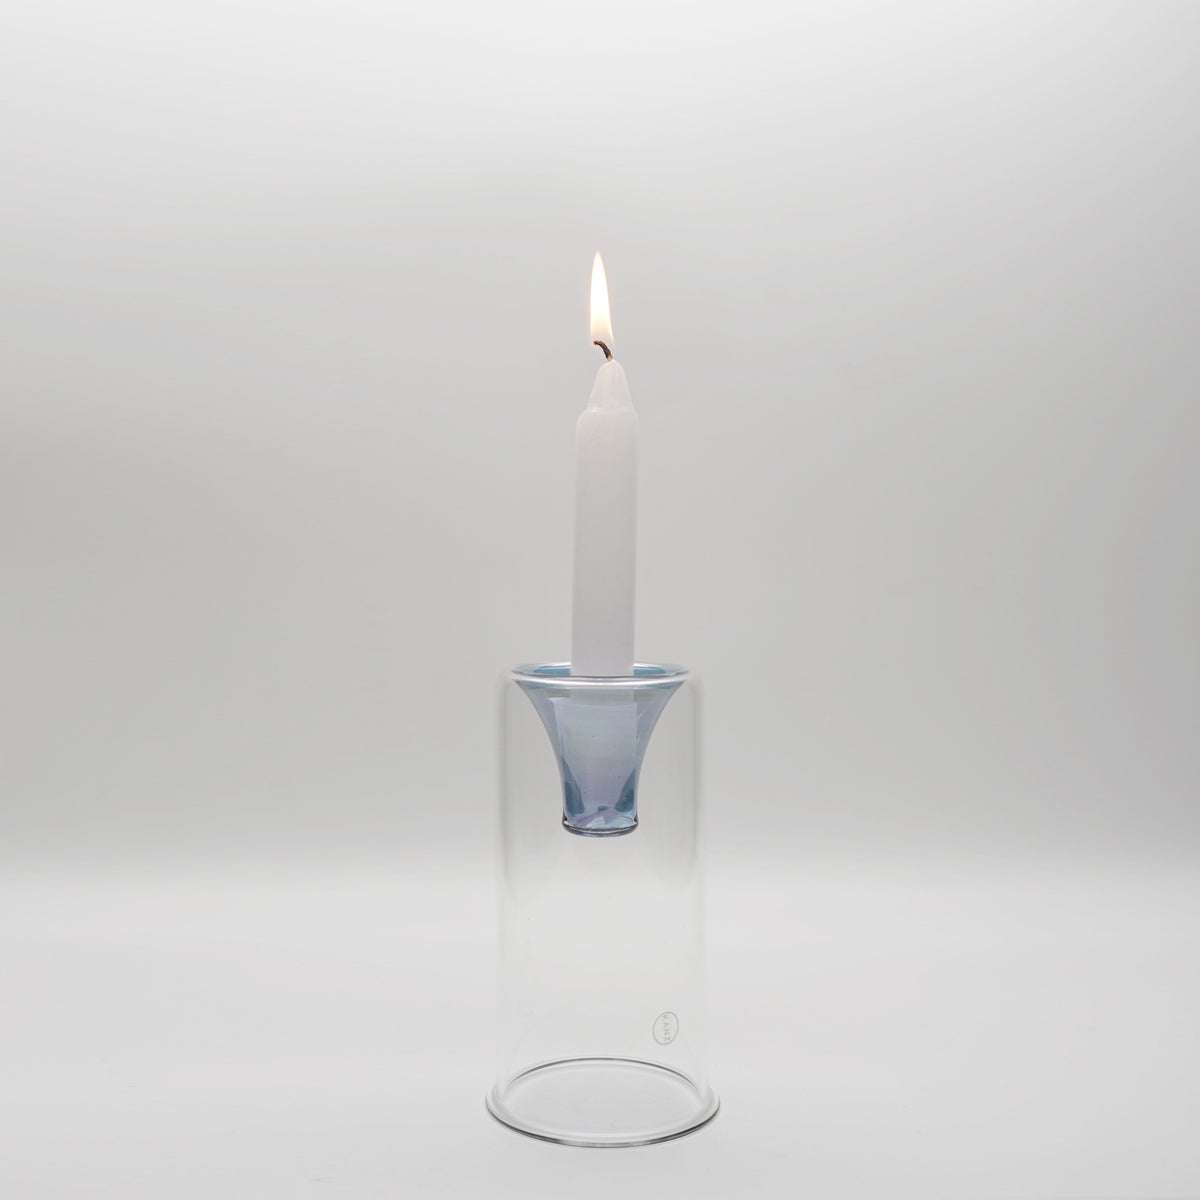 Tharros - medium candle holder (comes with three colors) - LAZADO